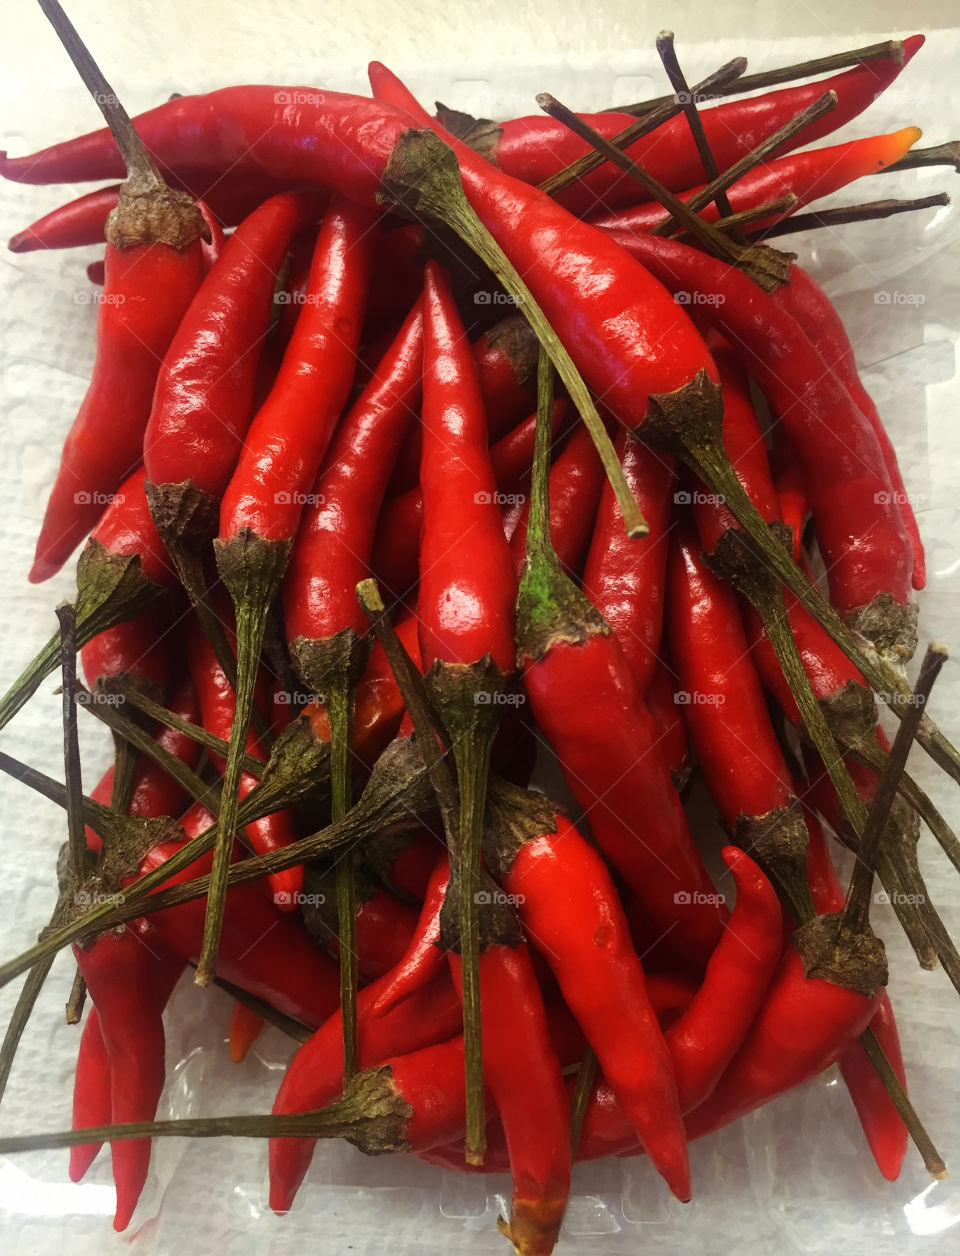 Red Thai chili peppers